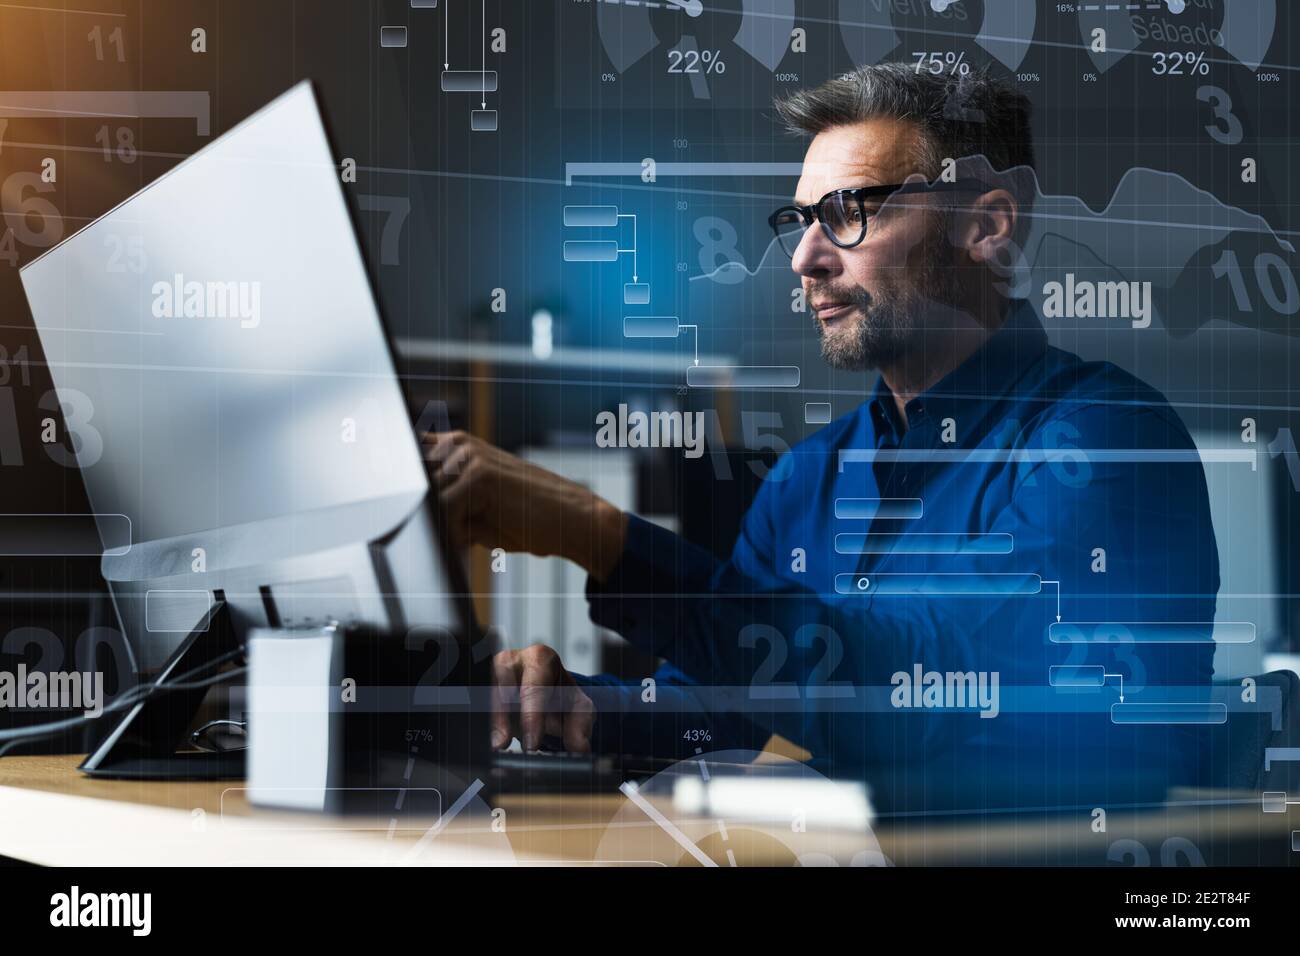 Project Manager Working With Gantt Digital Agenda Chart Stock Photo